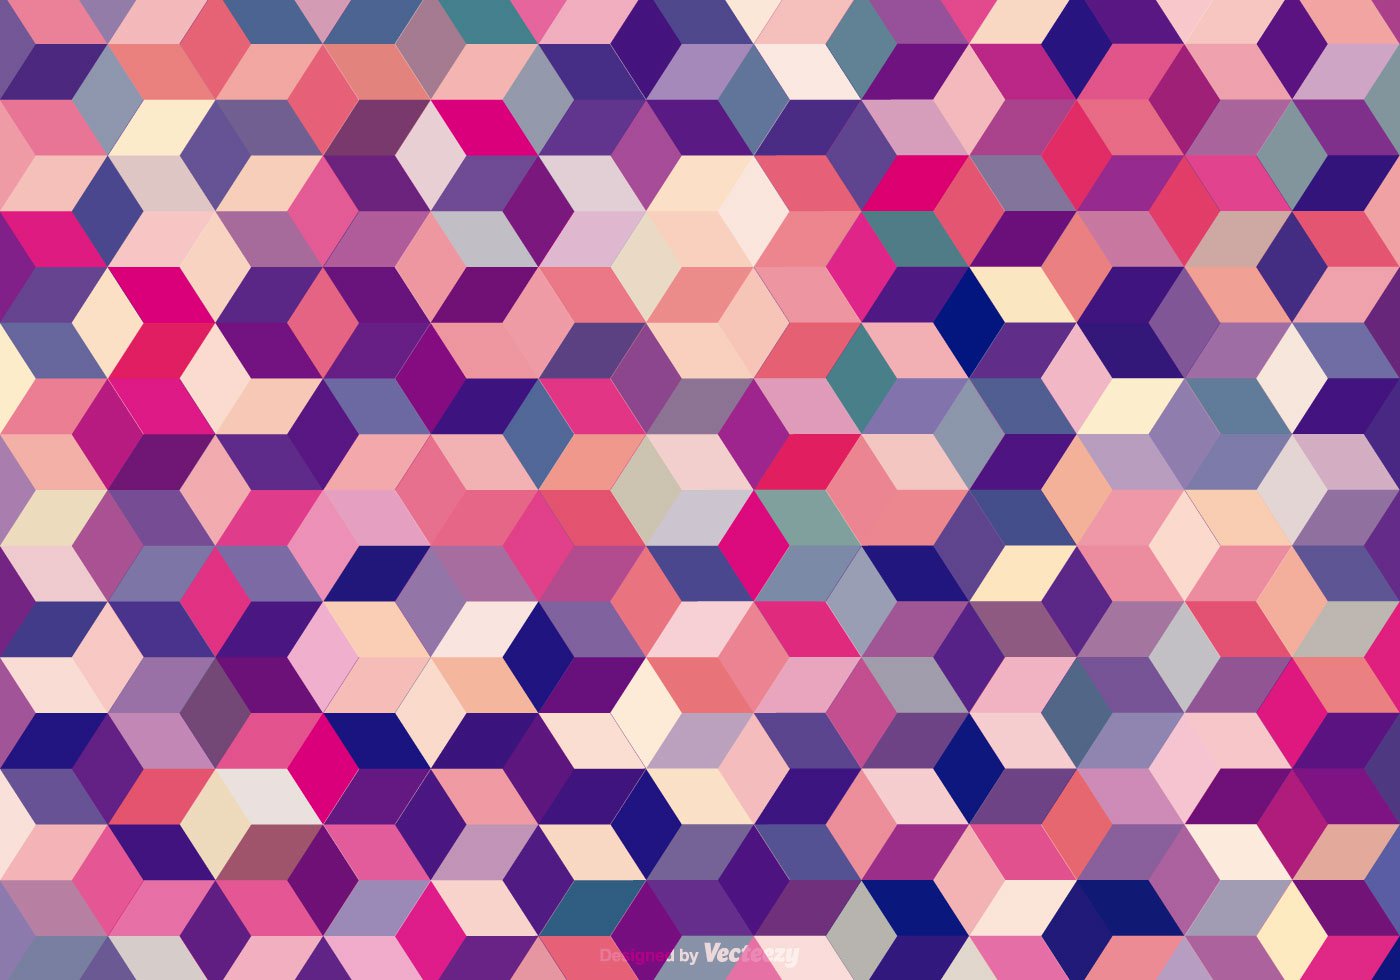 Abstract Colored Cubes Background   Download Free Vector